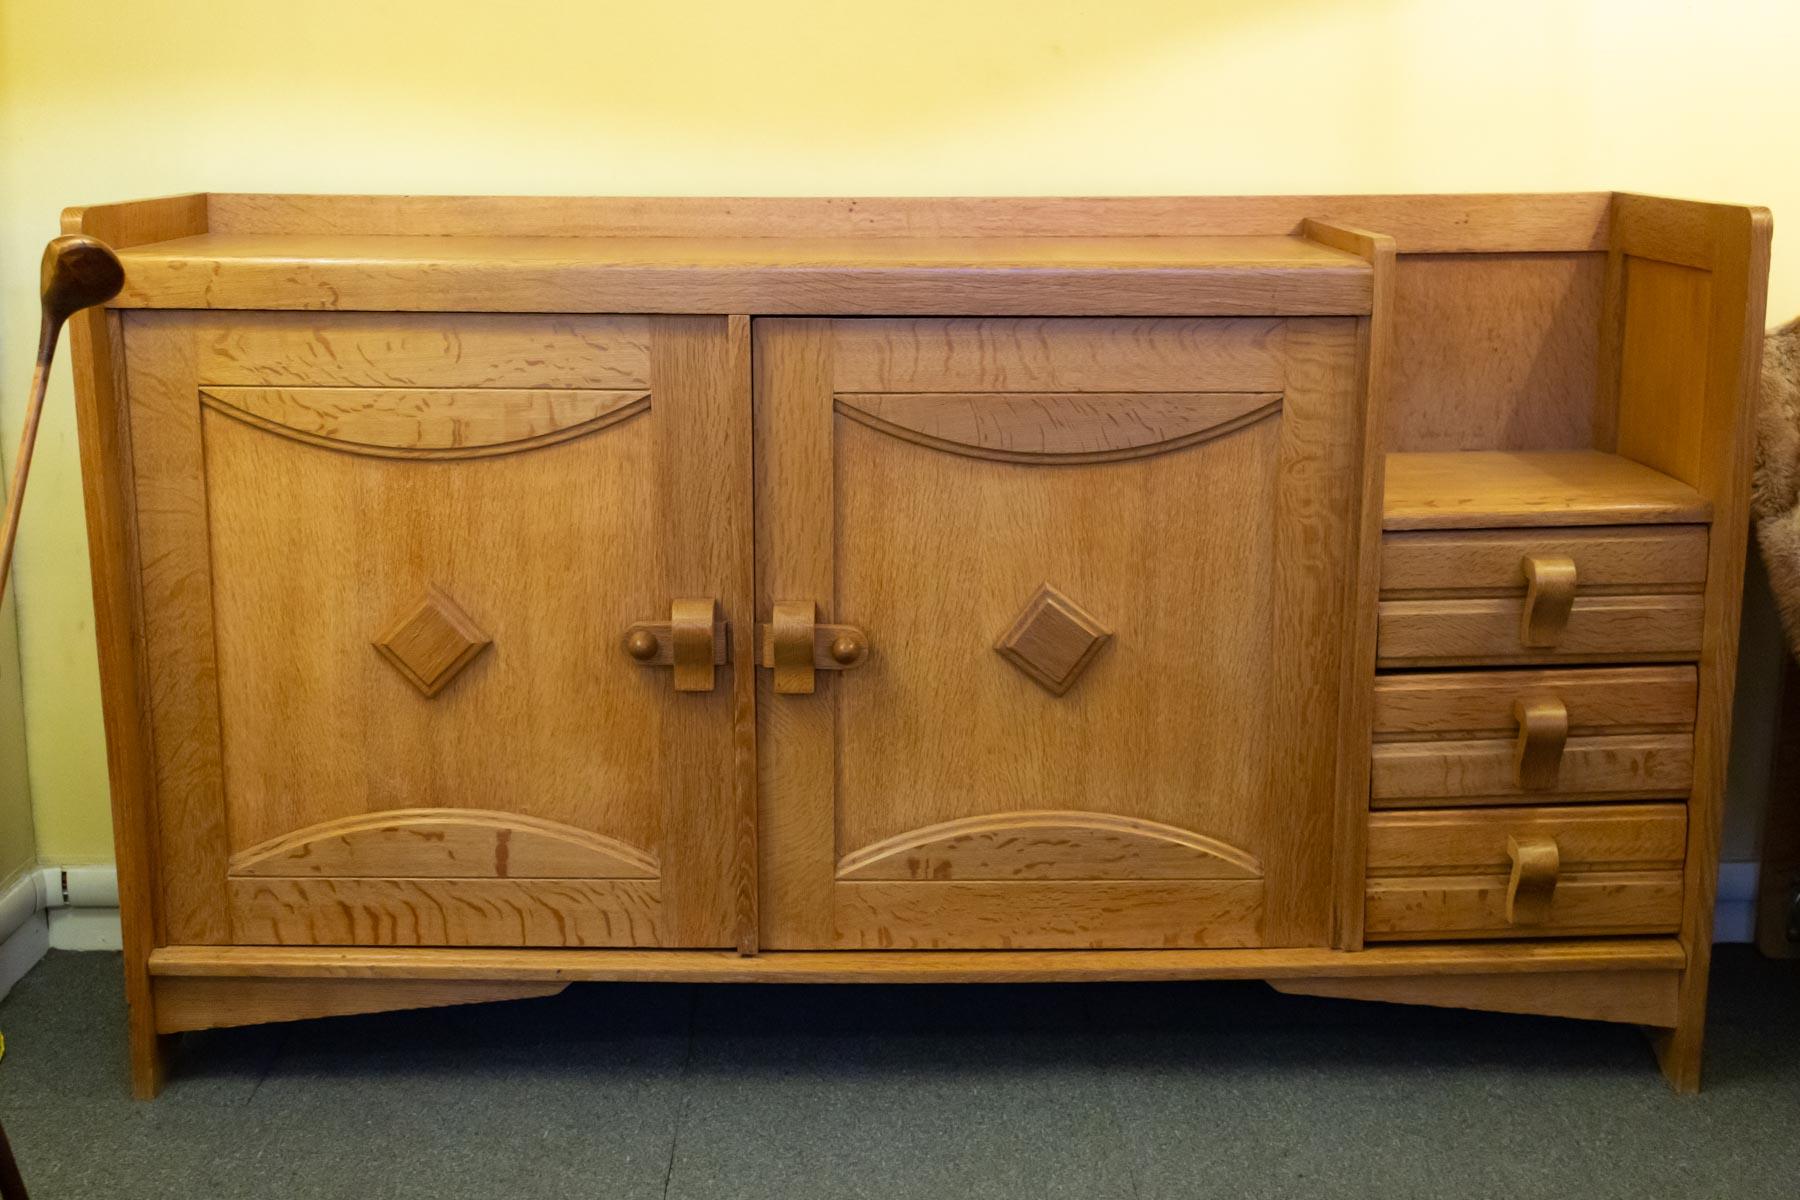 Guillerme and Chambron sideboard, 1960, oak, 3 drawers on the Right side
Measures: H 101cm, W 183cm, D 50cm.
  